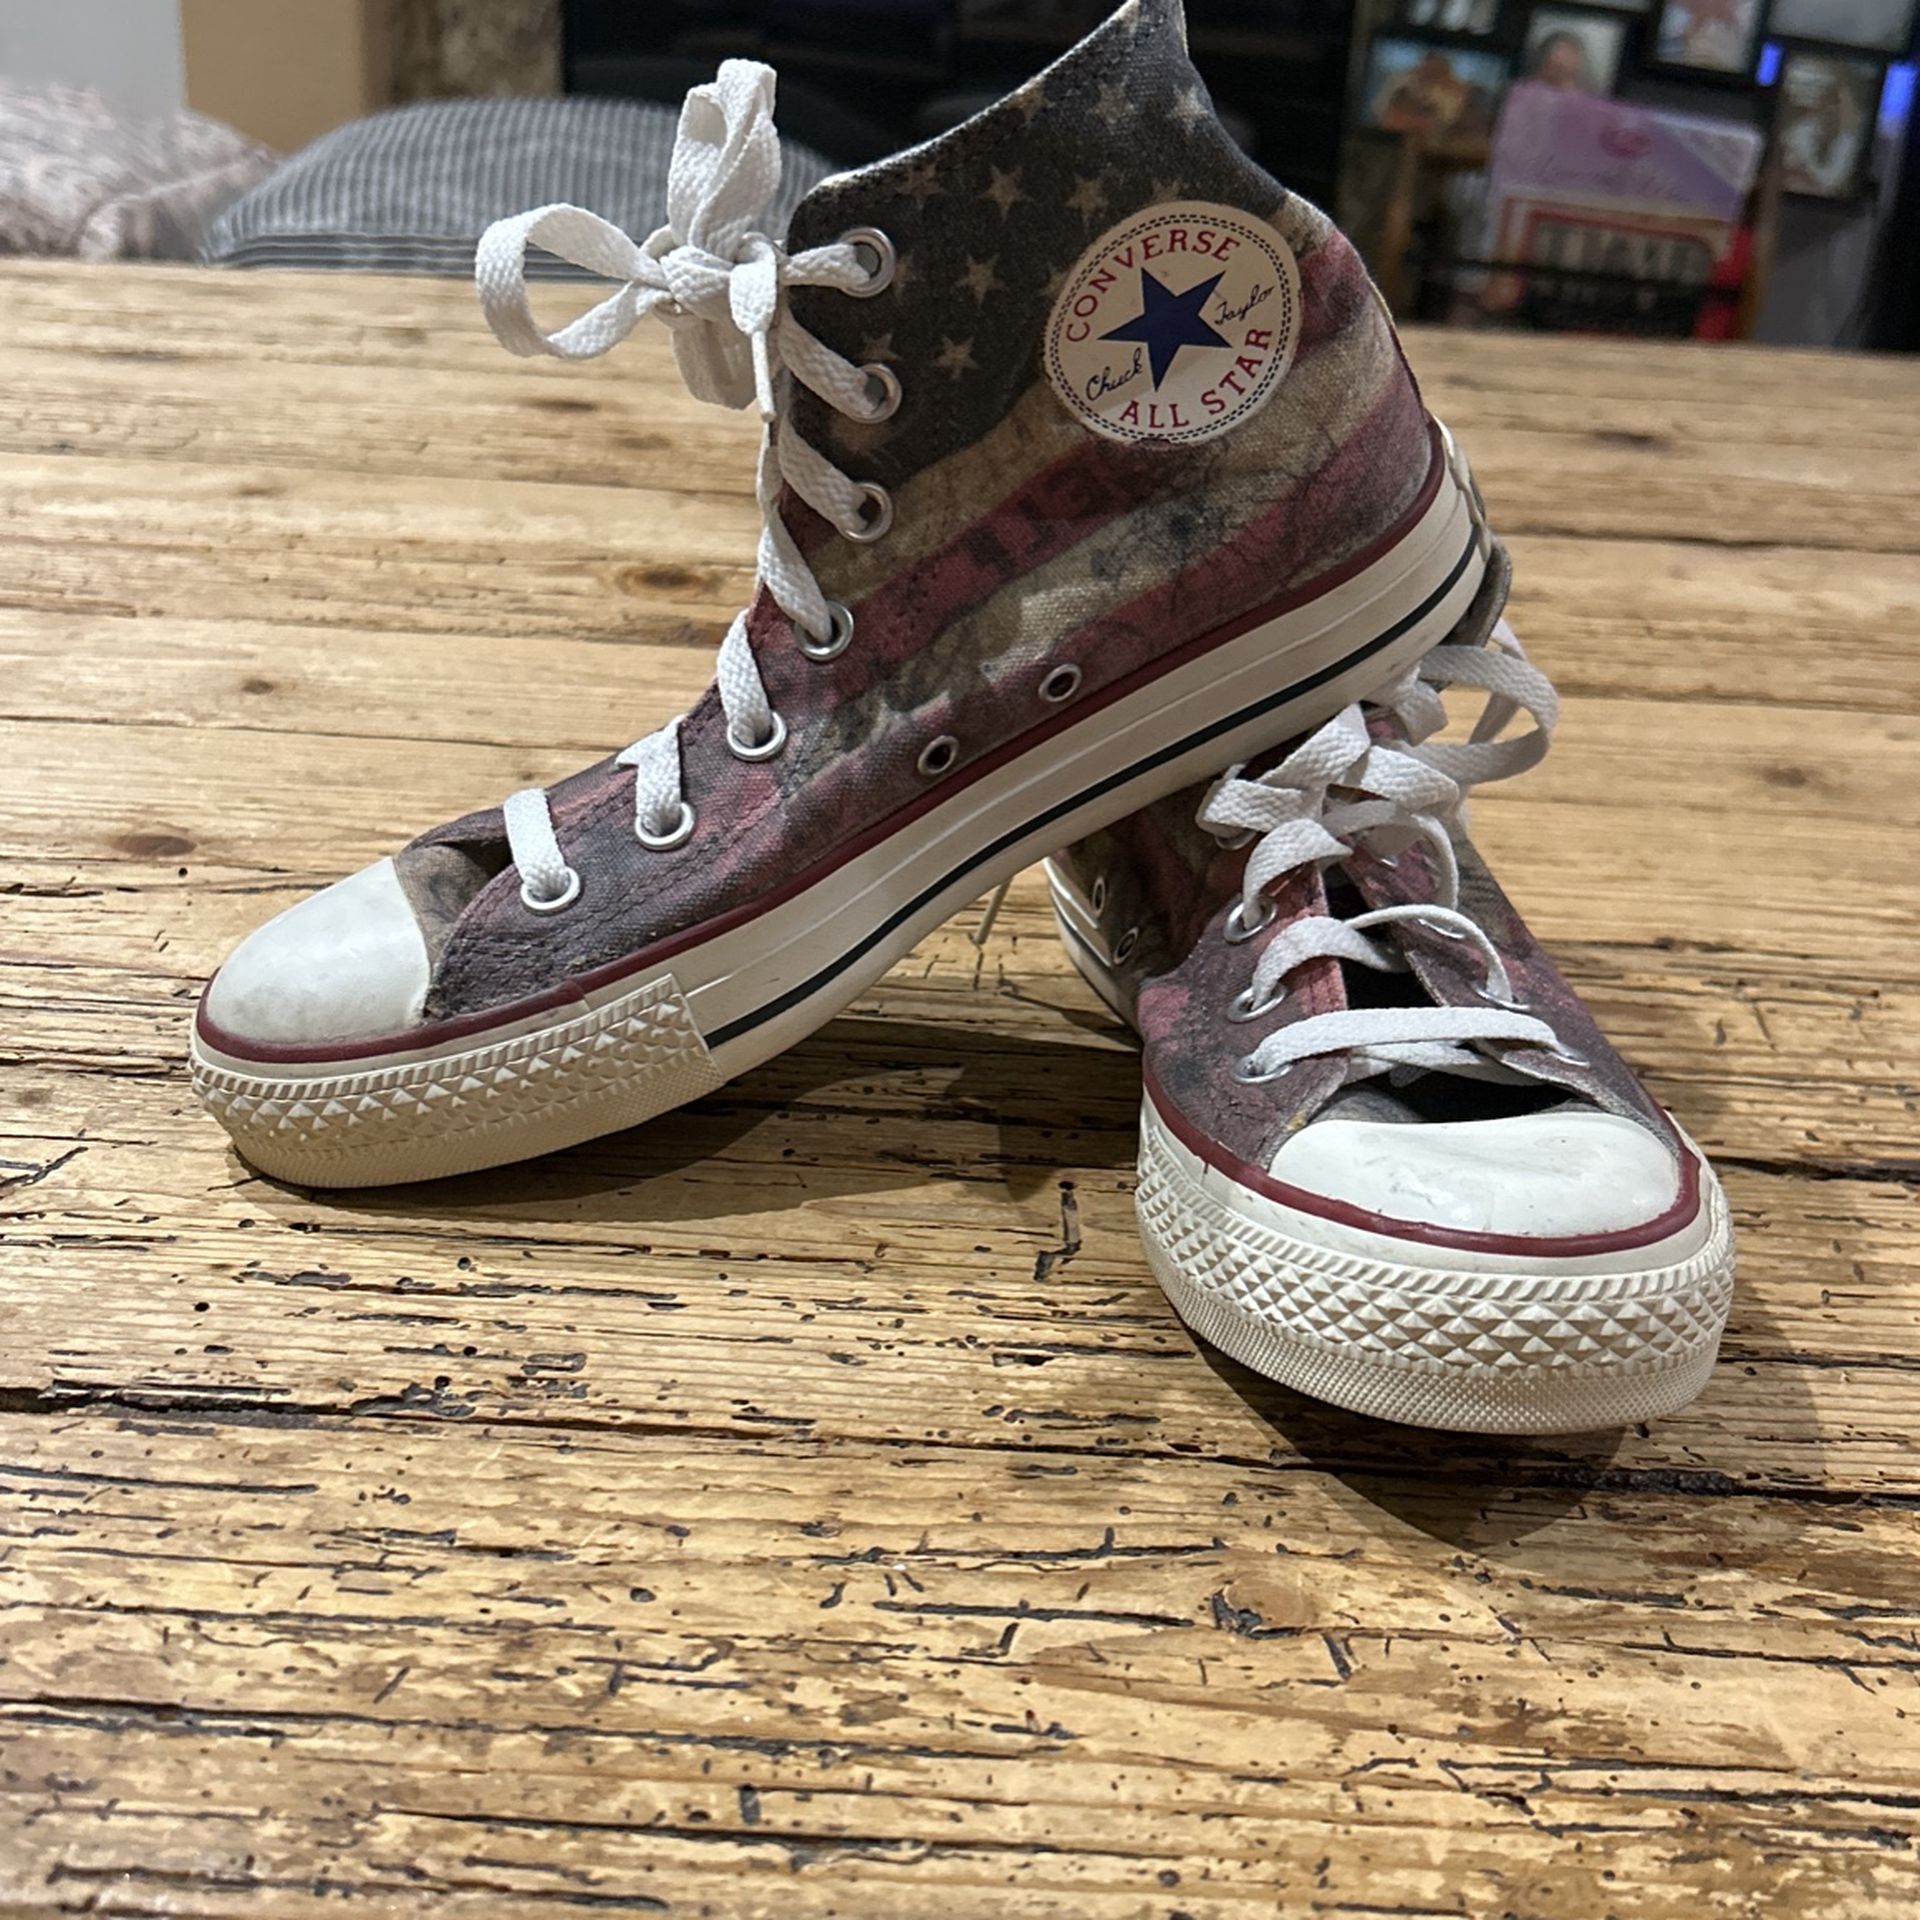 Converse All Star High Top American Flag Graffiti Sneakers Women’s Size 7.5